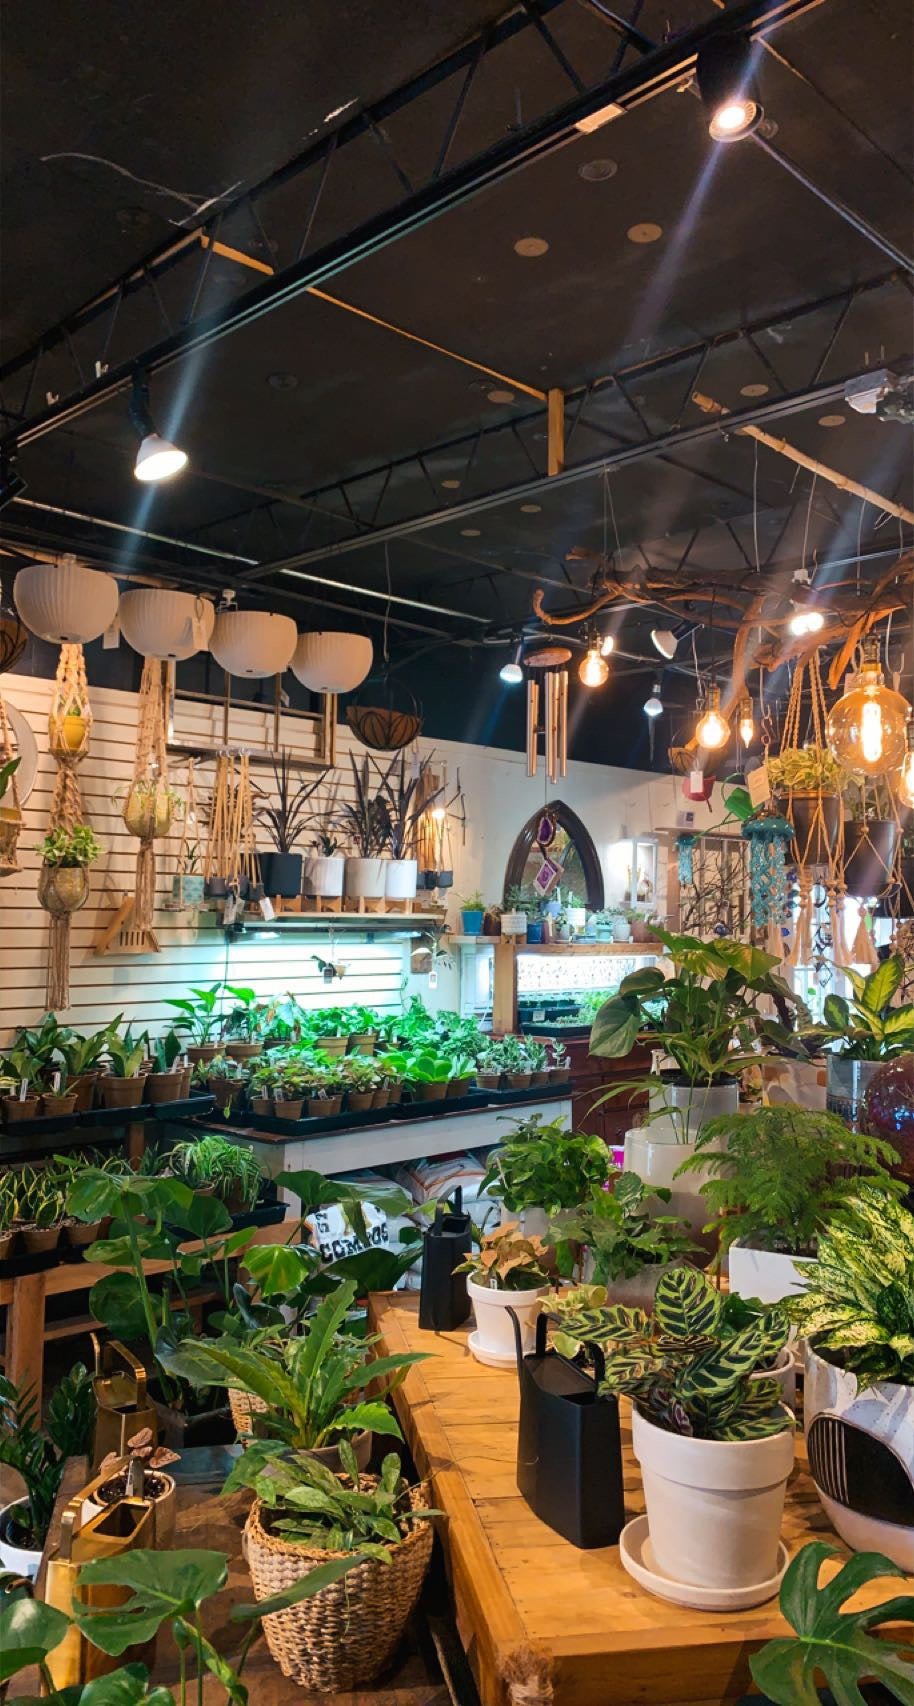 Interior of gardners outpost. They offer a variety of interior plants as well as pots and a very aesthetically pleasing placement.